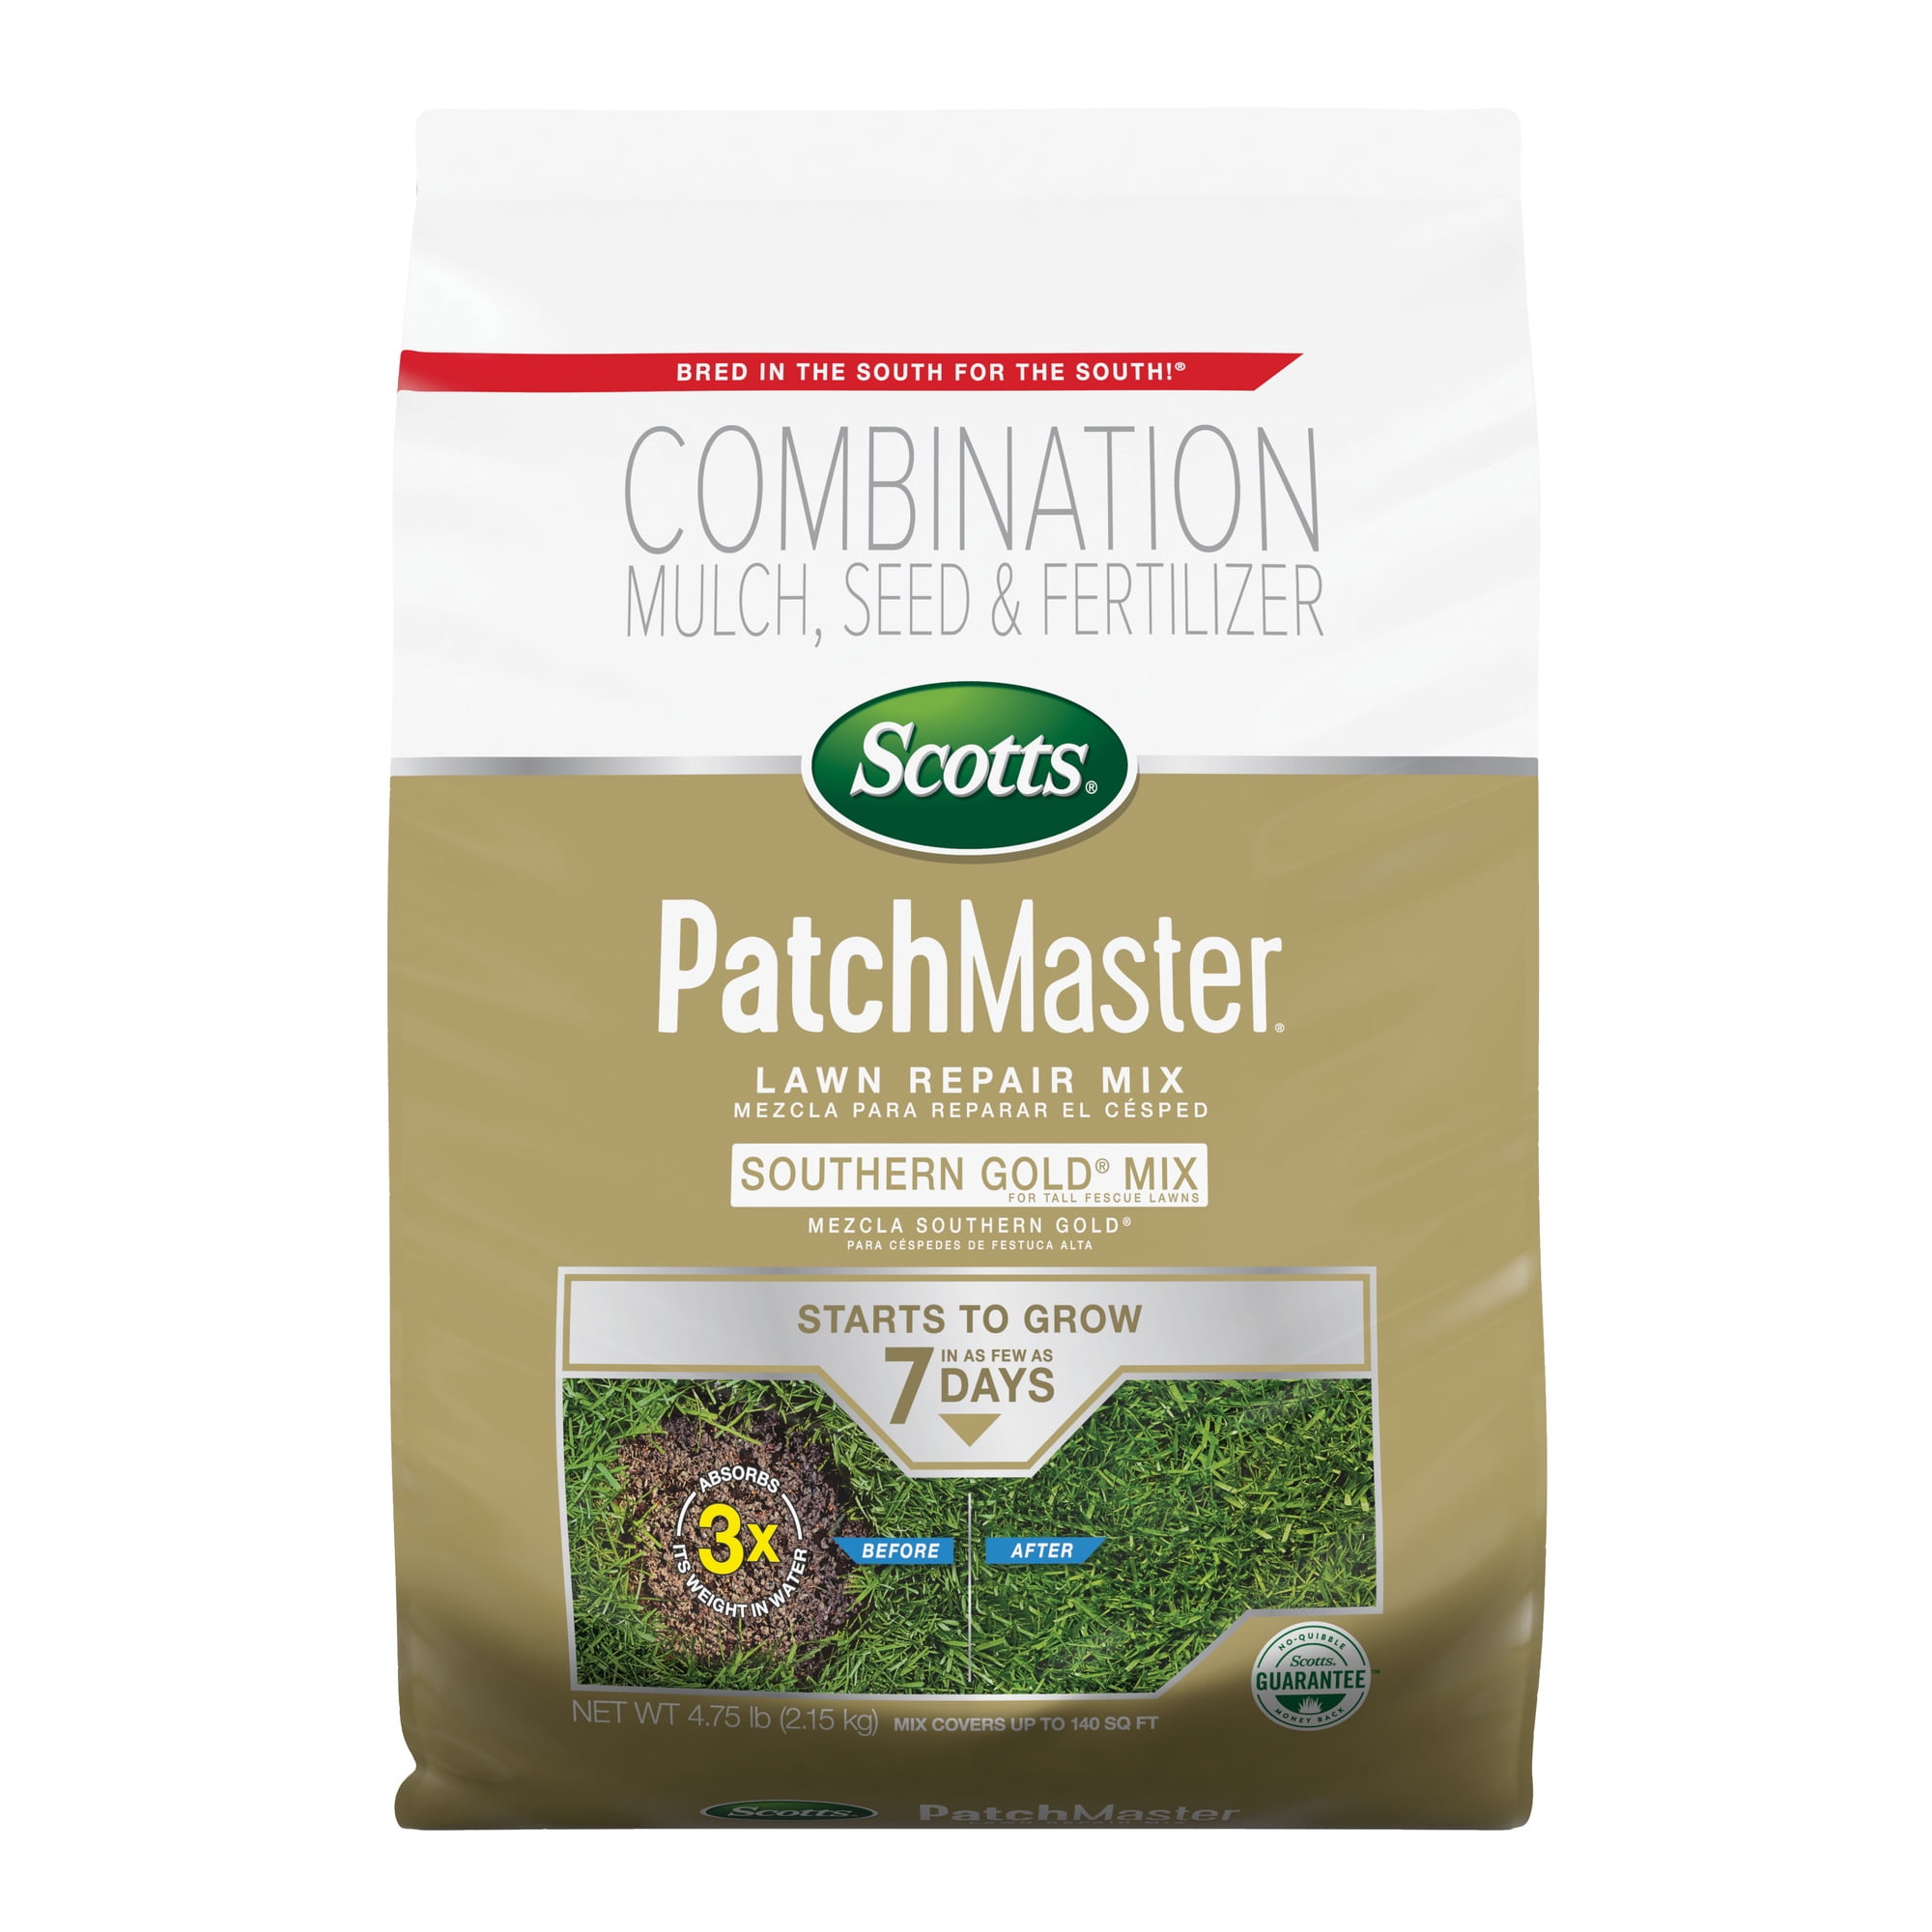 Scotts PatchMaster Lawn Repair Mix Southern Gold Mix for Tall Fescue Lawns 10 lbs.